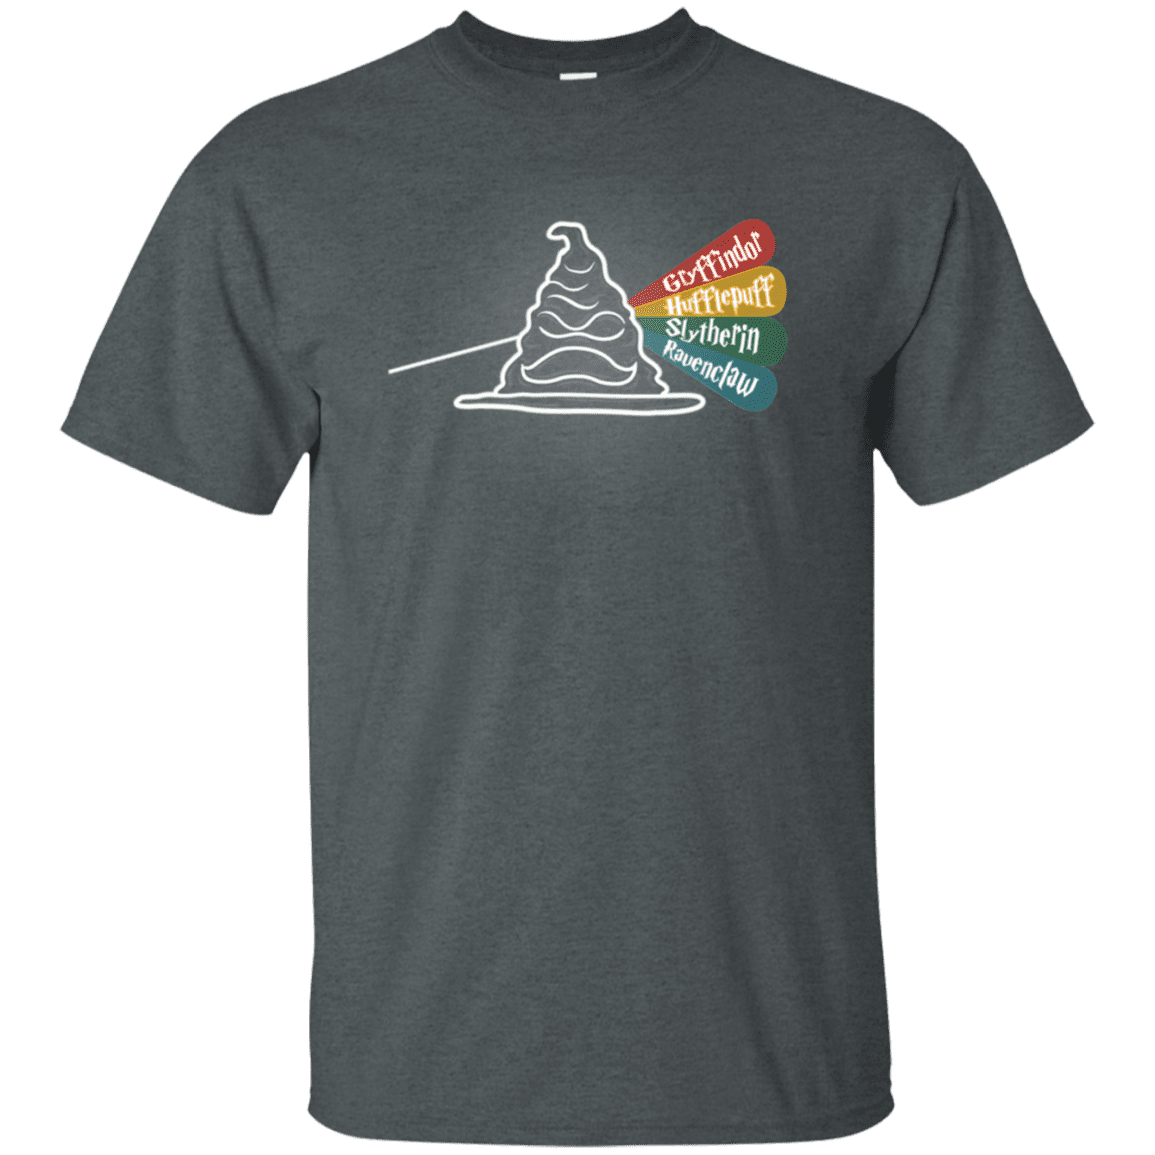 Dark Side of the Hat T-Shirt